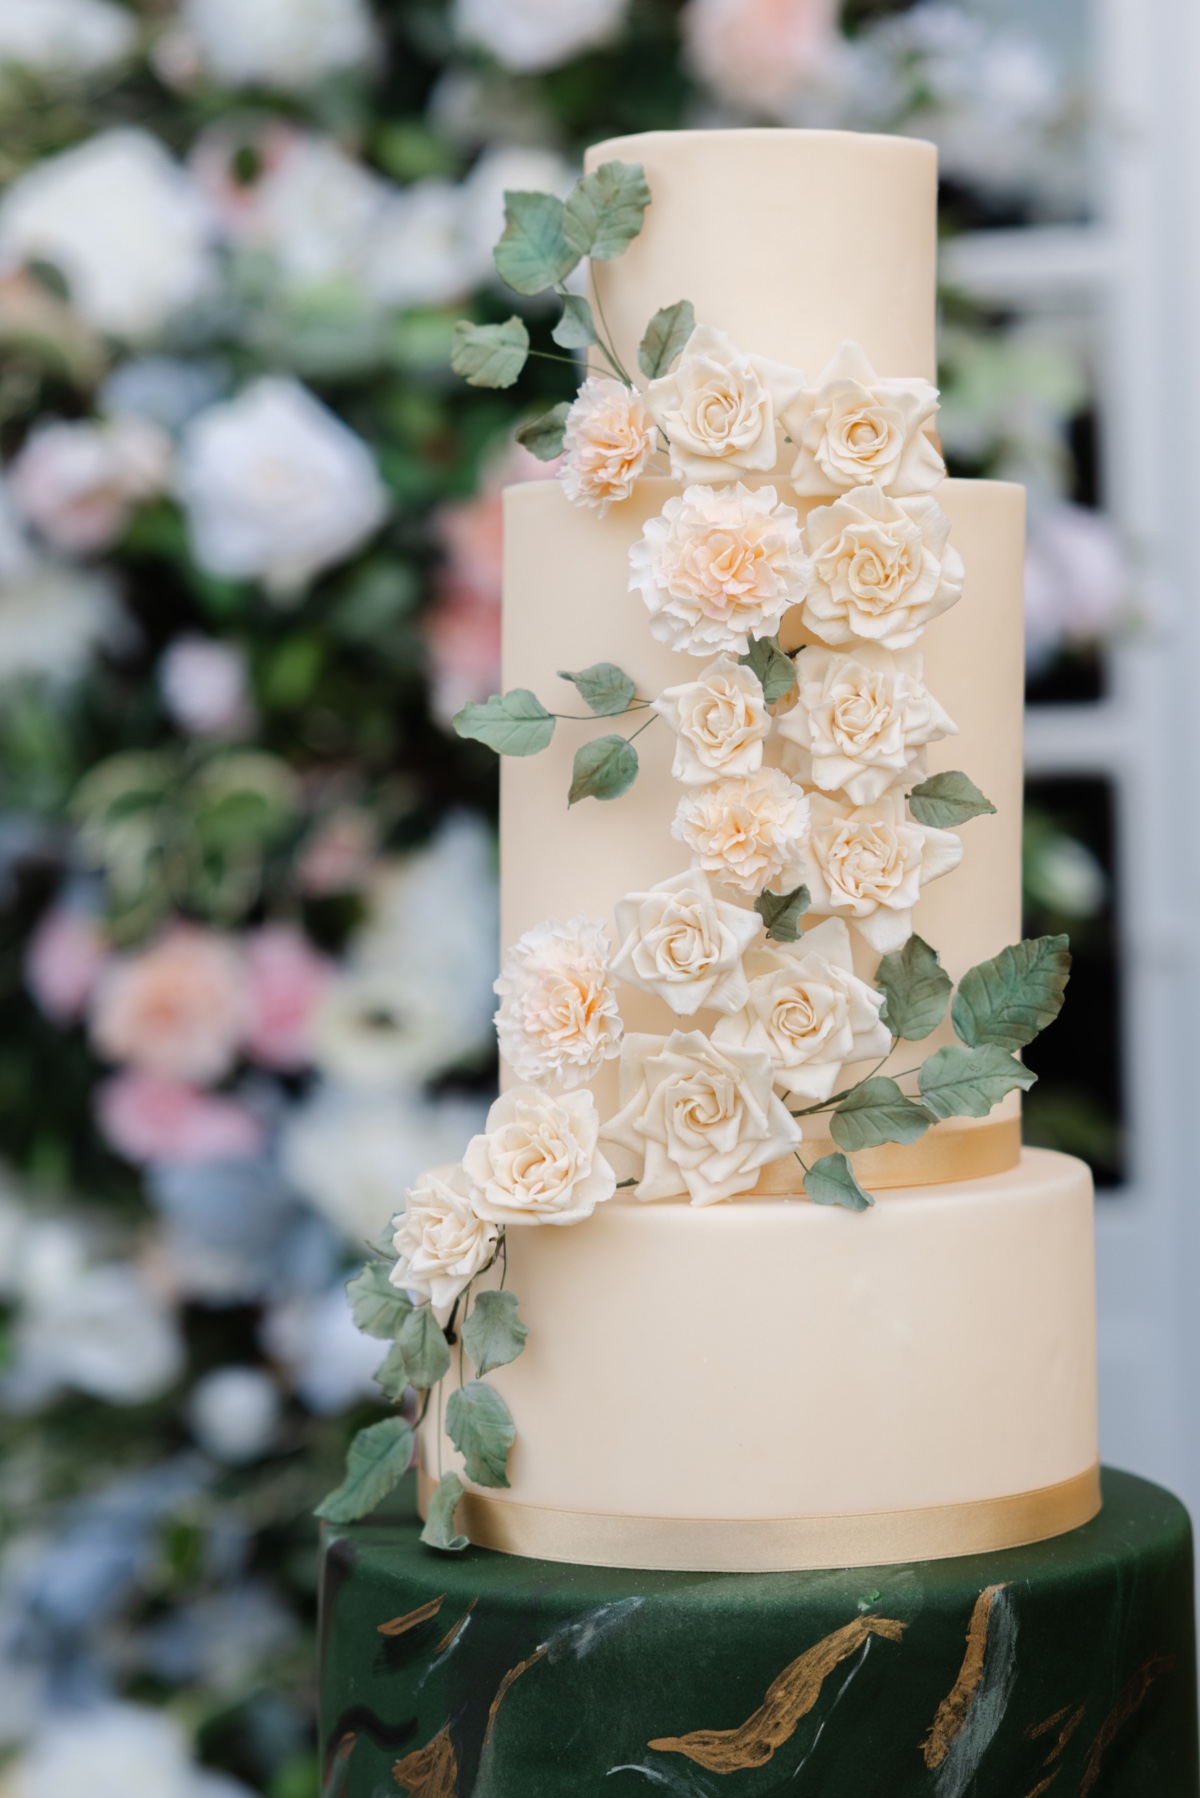 Warm sand and emerald green colored wedding cake with flowers